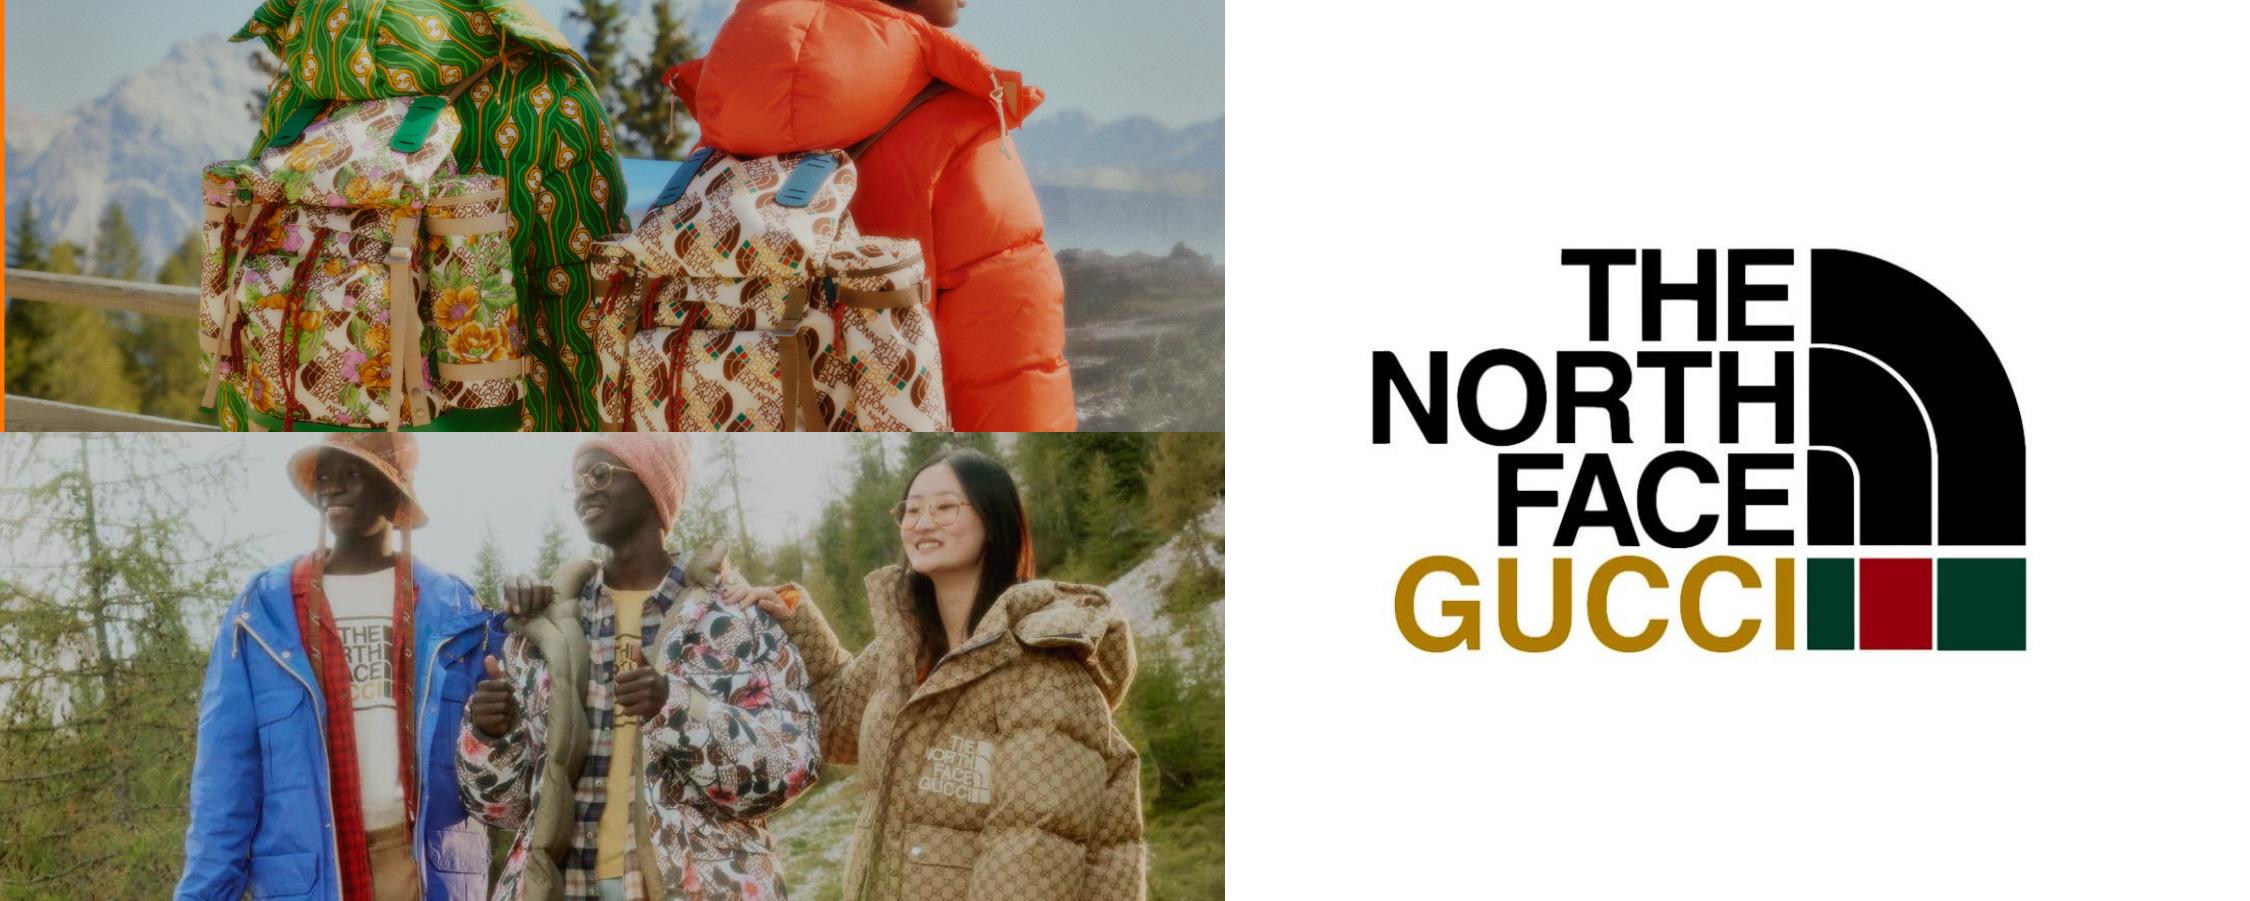 The North Face x Gucci Pop-Ups Series Launch